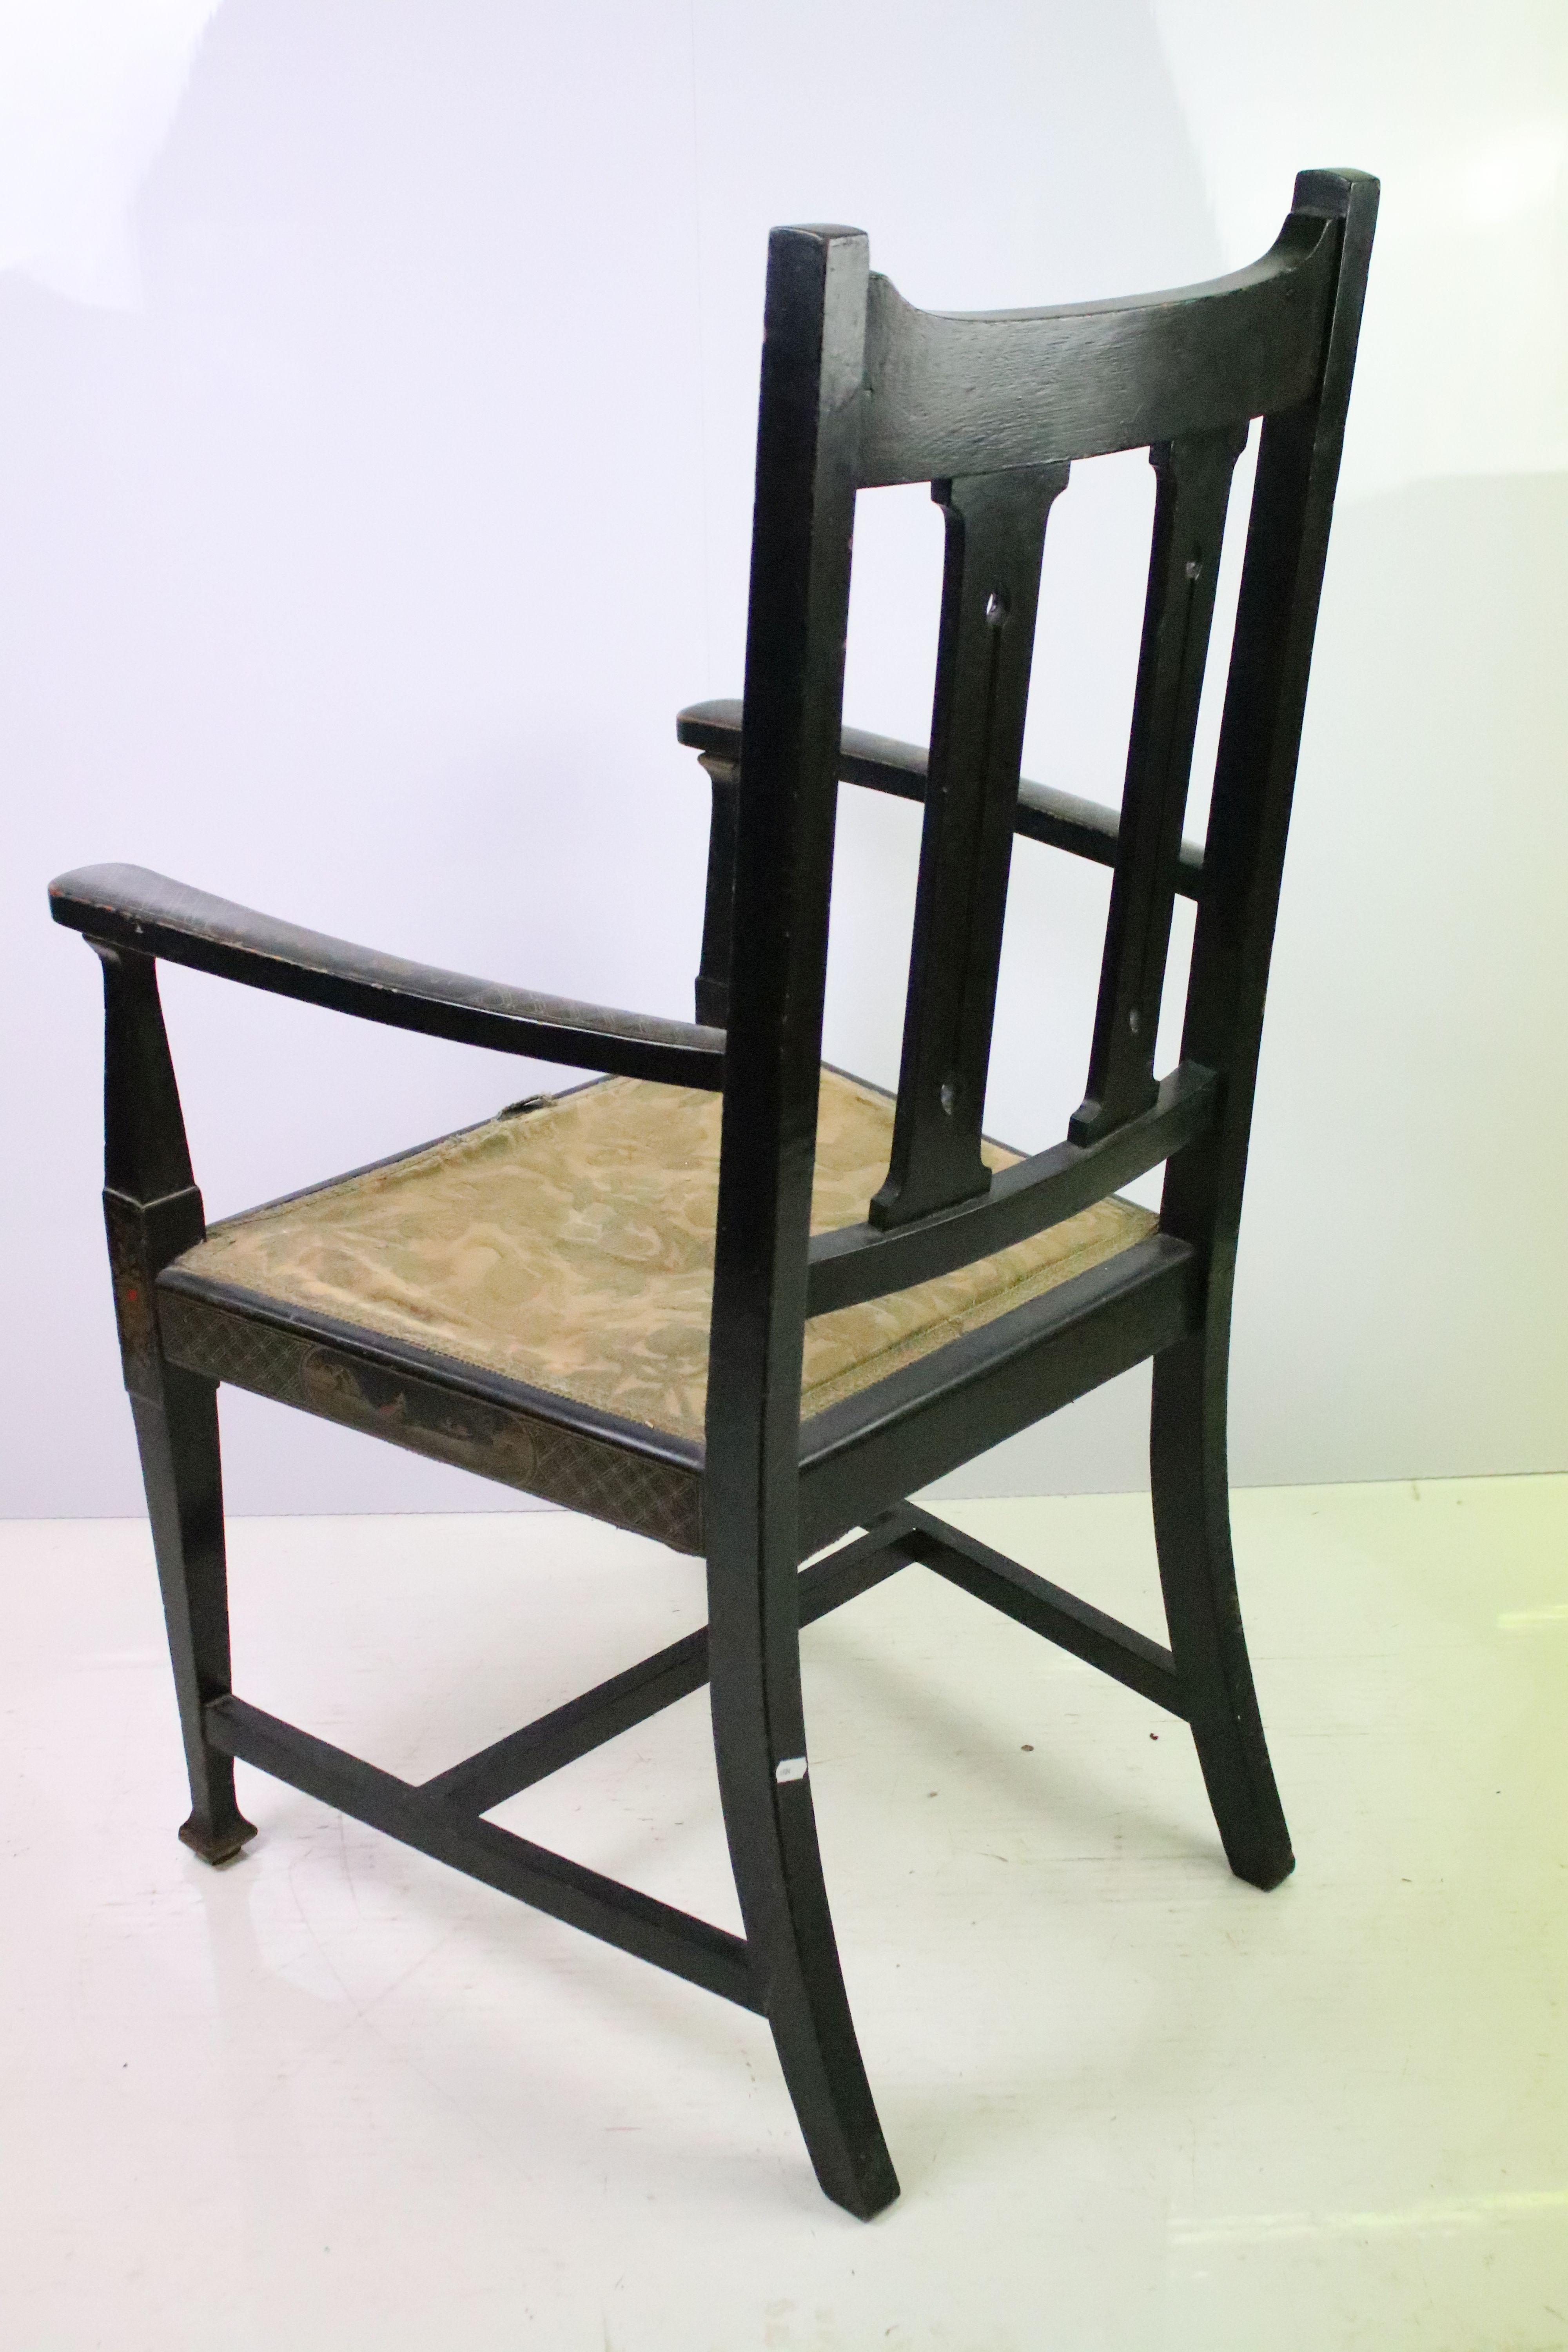 19th century Oriental japanned chair, decorated with painted panels, 111.5cm high x 60cm wide x 59cm - Image 4 of 5